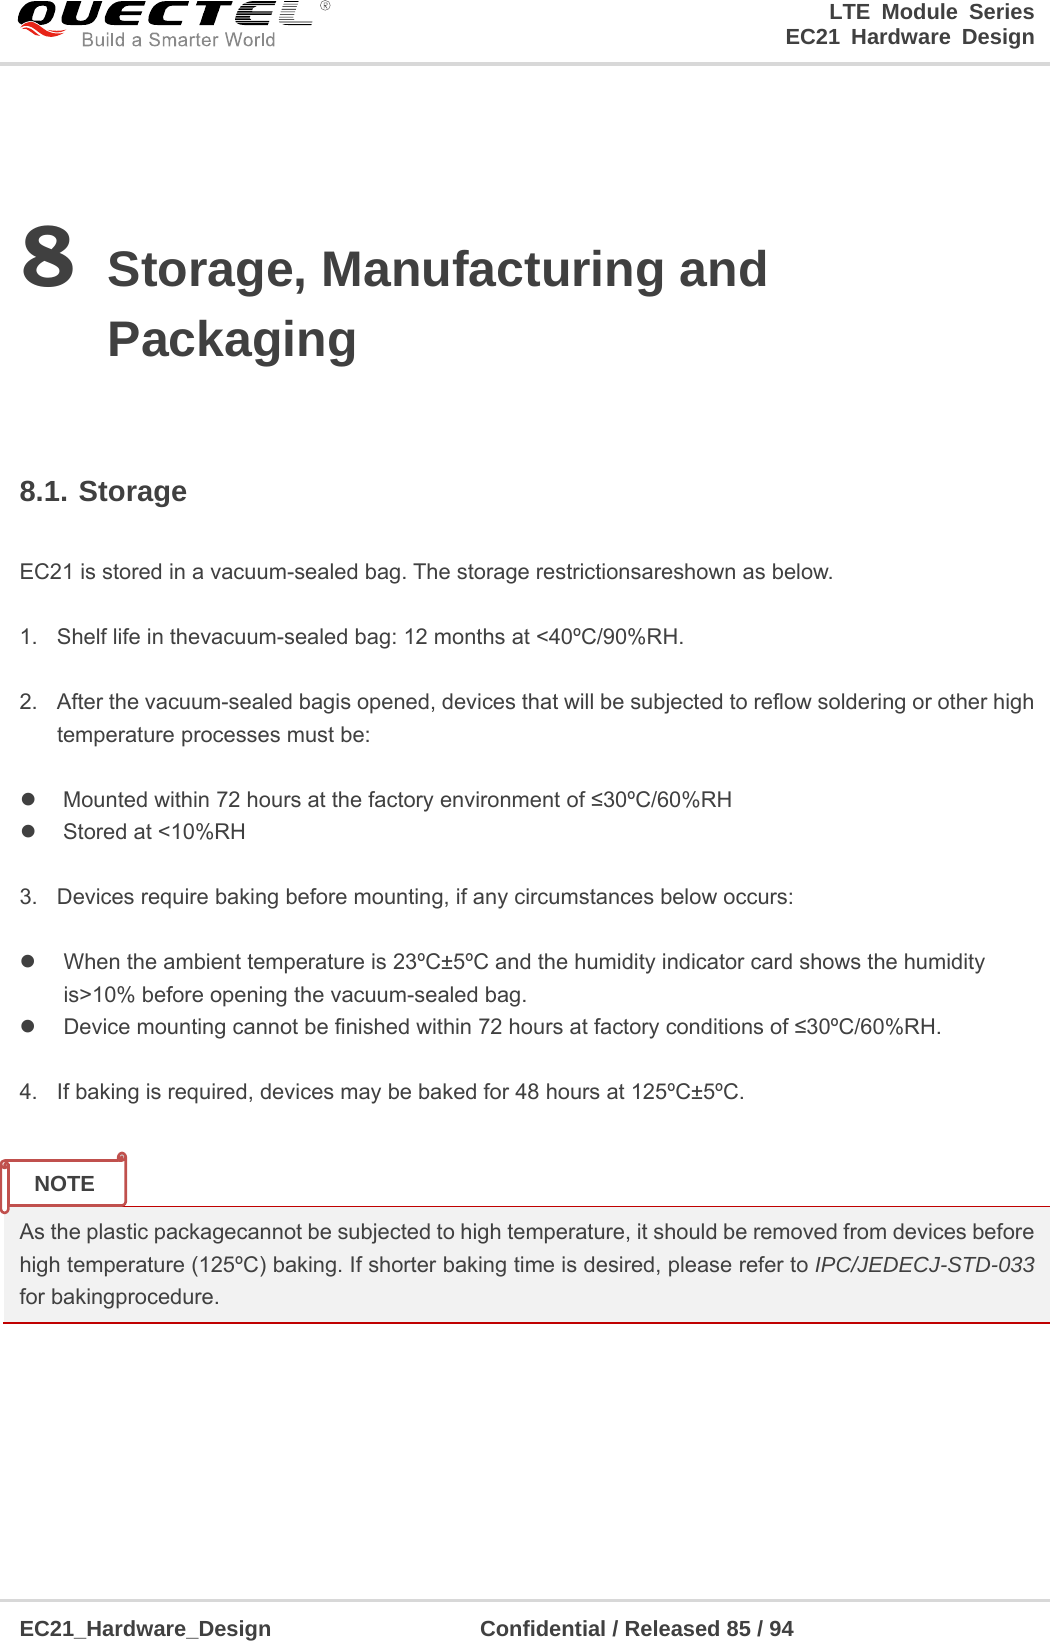 LTE Module Series                                                                 EC21 Hardware Design  EC21_Hardware_Design                   Confidential / Released 85 / 94    8 Storage, Manufacturing and Packaging  8.1. Storage  EC21 is stored in a vacuum-sealed bag. The storage restrictionsareshown as below.    1.  Shelf life in thevacuum-sealed bag: 12 months at &lt;40ºC/90%RH.    2.  After the vacuum-sealed bagis opened, devices that will be subjected to reflow soldering or other high temperature processes must be:    Mounted within 72 hours at the factory environment of ≤30ºC/60%RH   Stored at &lt;10%RH  3.  Devices require baking before mounting, if any circumstances below occurs:    When the ambient temperature is 23ºC±5ºC and the humidity indicator card shows the humidity is&gt;10% before opening the vacuum-sealed bag.   Device mounting cannot be finished within 72 hours at factory conditions of ≤30ºC/60%RH.  4.  If baking is required, devices may be baked for 48 hours at 125ºC±5ºC.   As the plastic packagecannot be subjected to high temperature, it should be removed from devices before high temperature (125ºC) baking. If shorter baking time is desired, please refer to IPC/JEDECJ-STD-033 for bakingprocedure.    NOTE 